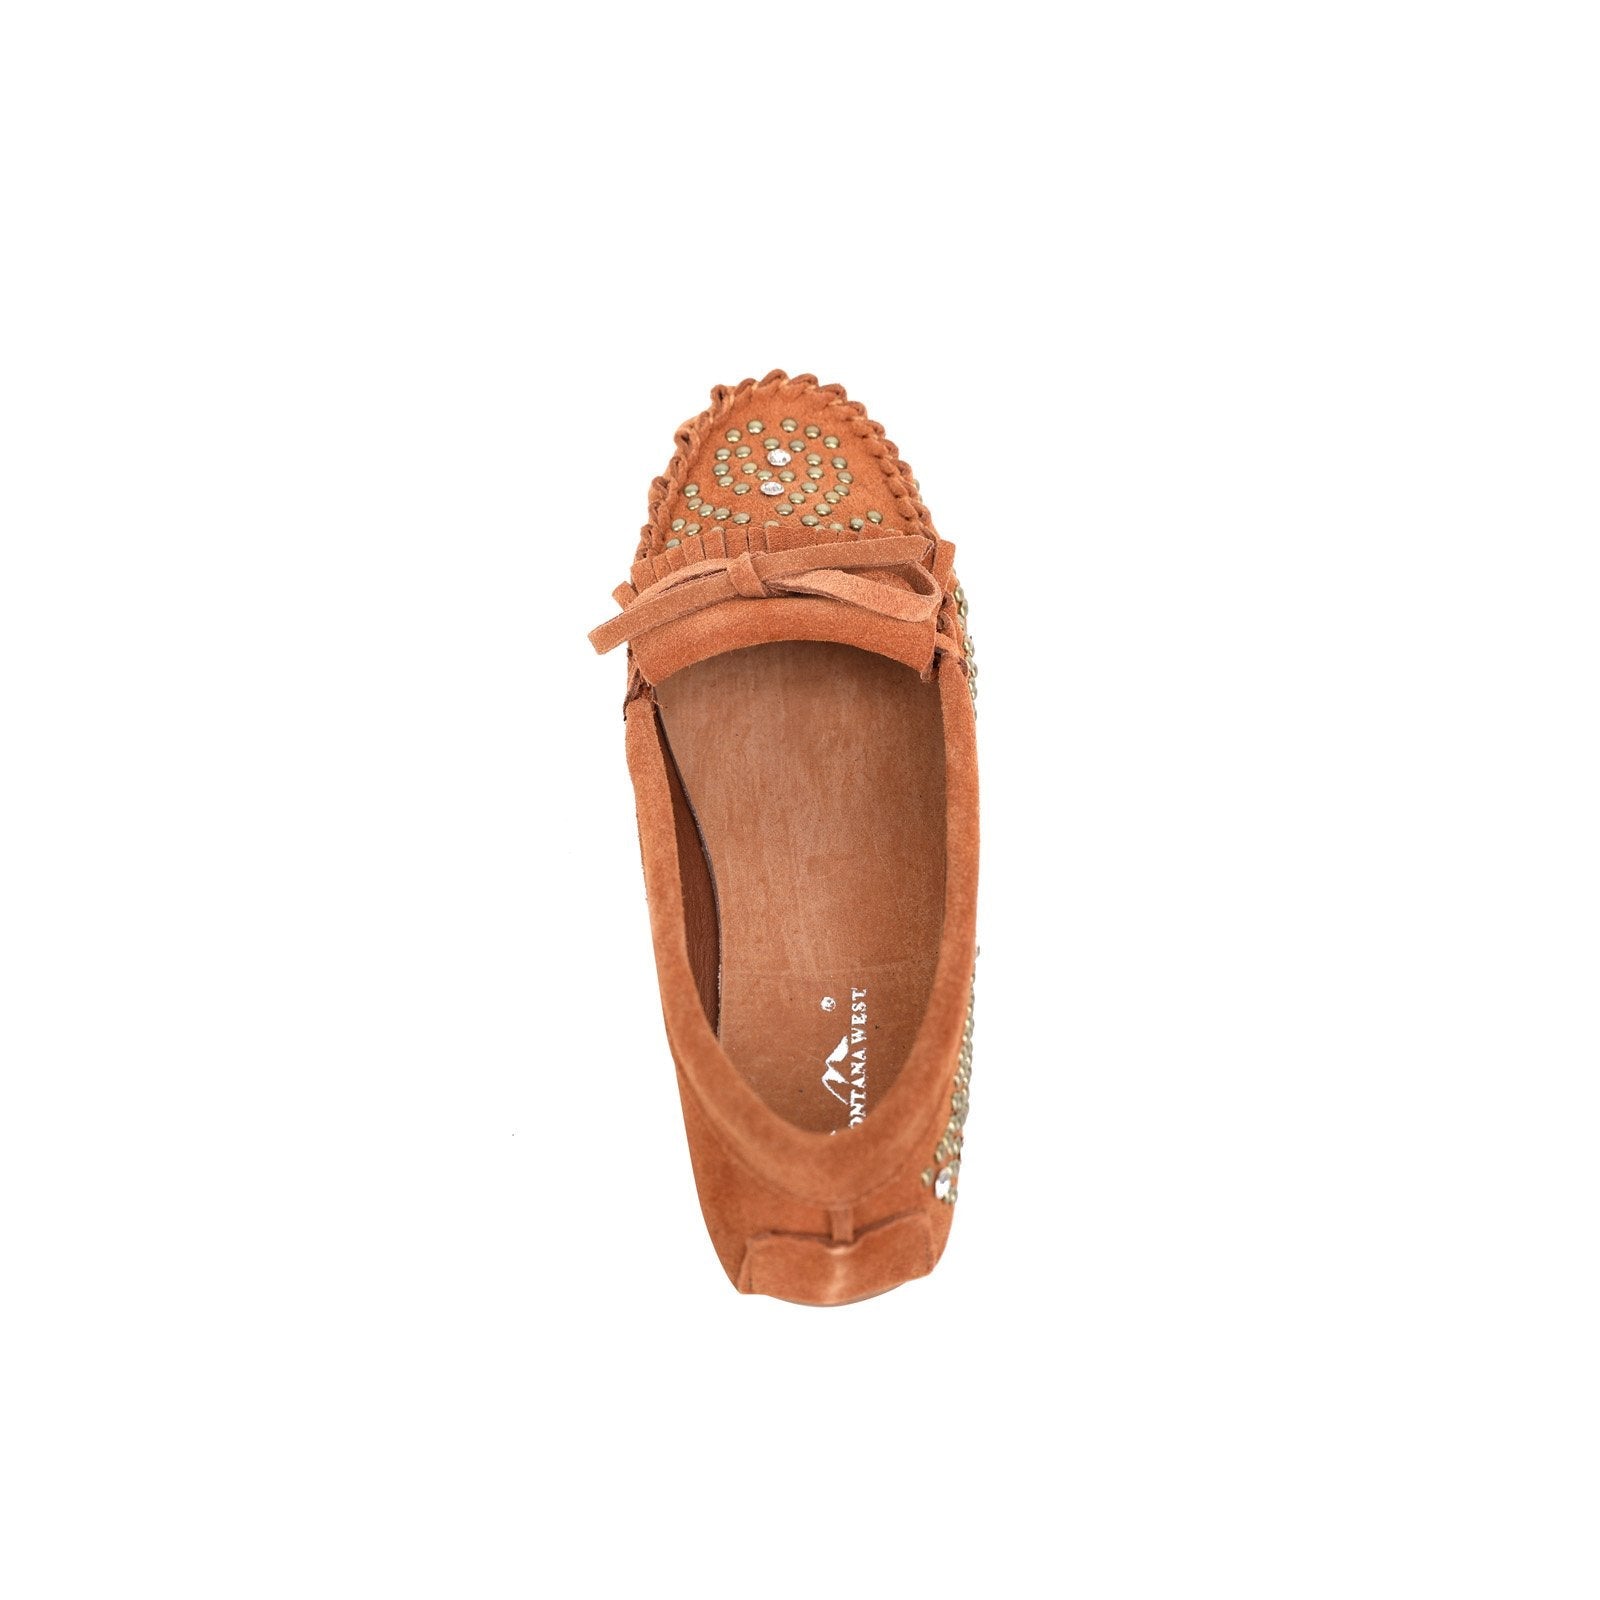 Leather Suede Moccasin Slipper Studs Accents - Cowgirl Wear